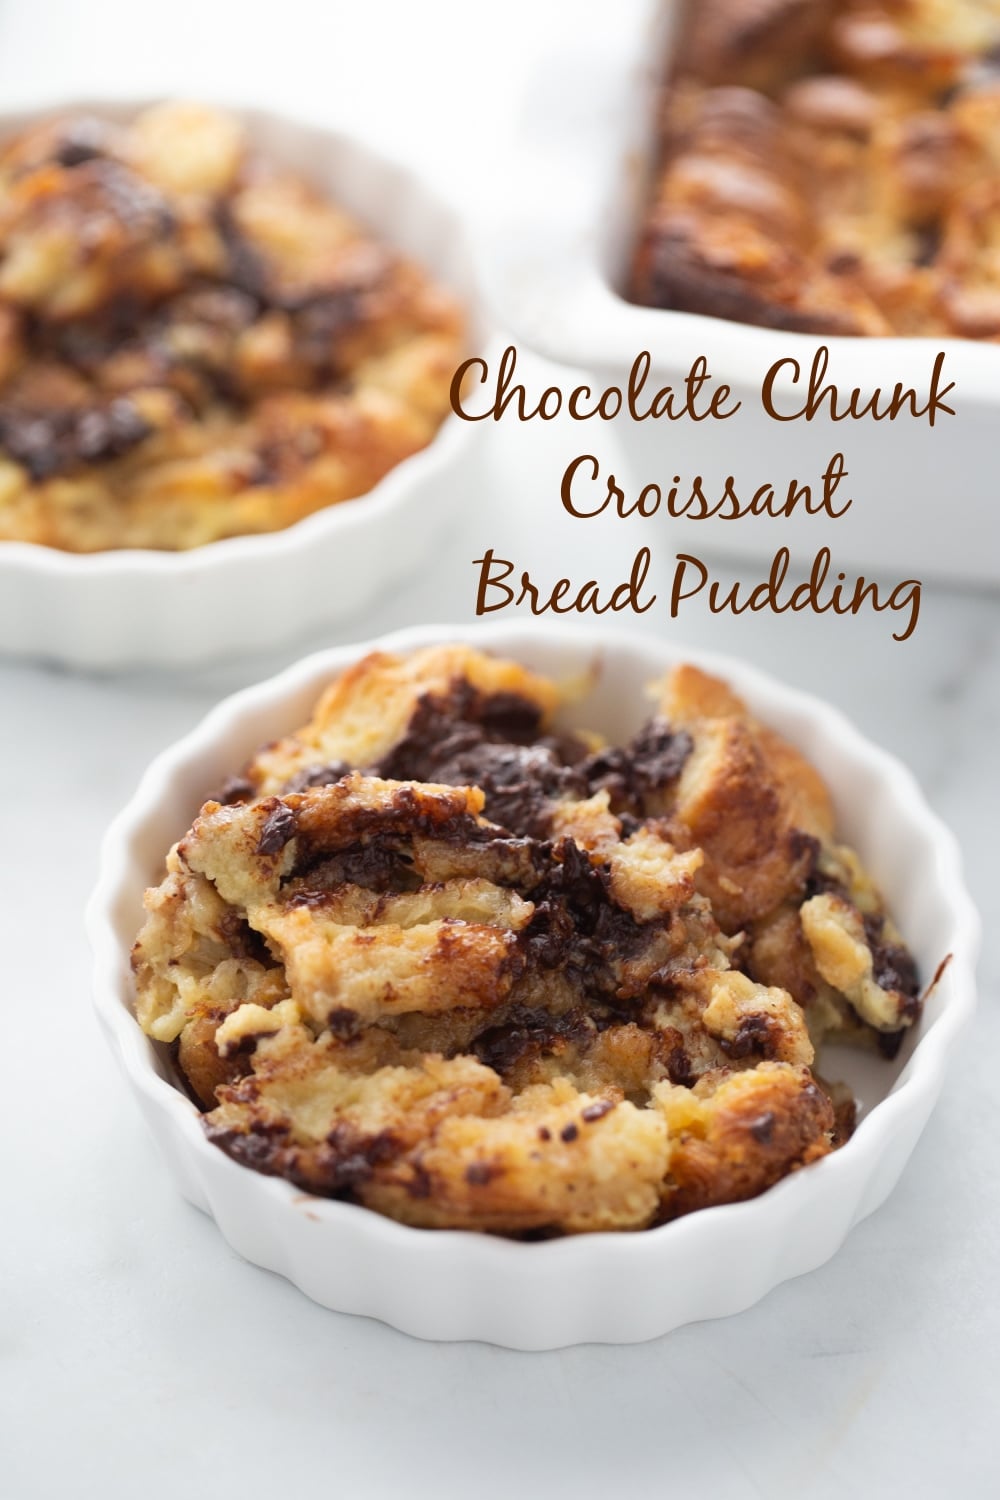 This chocolate croissant bread pudding is an easy to make, decadent, dessert that can be put together, baked and served within the hour. Make it tonight! via @cmpollak1